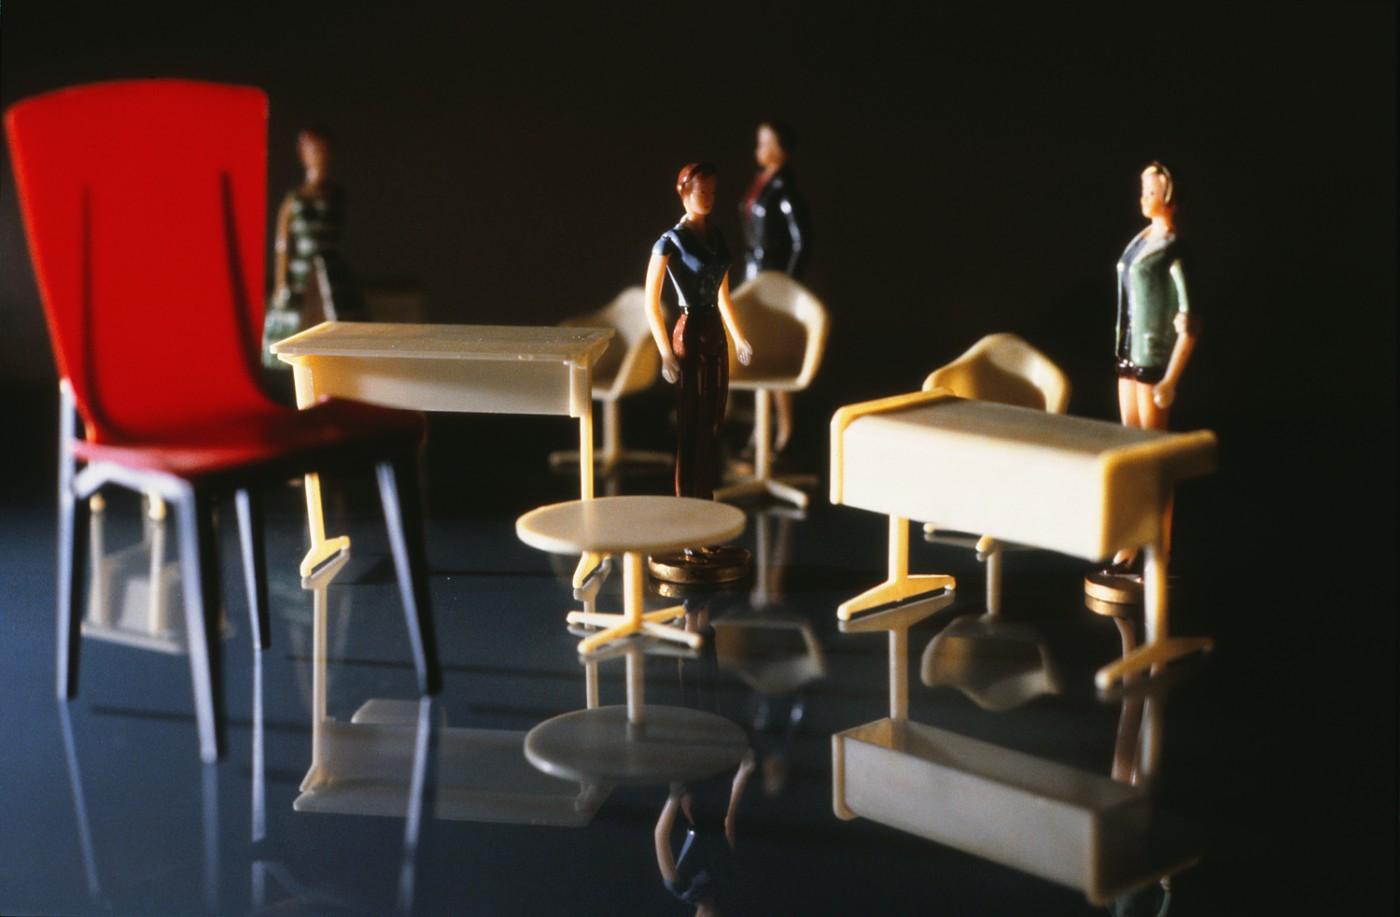 Laurie Simmons, Modern Office (with Four Women), 1998